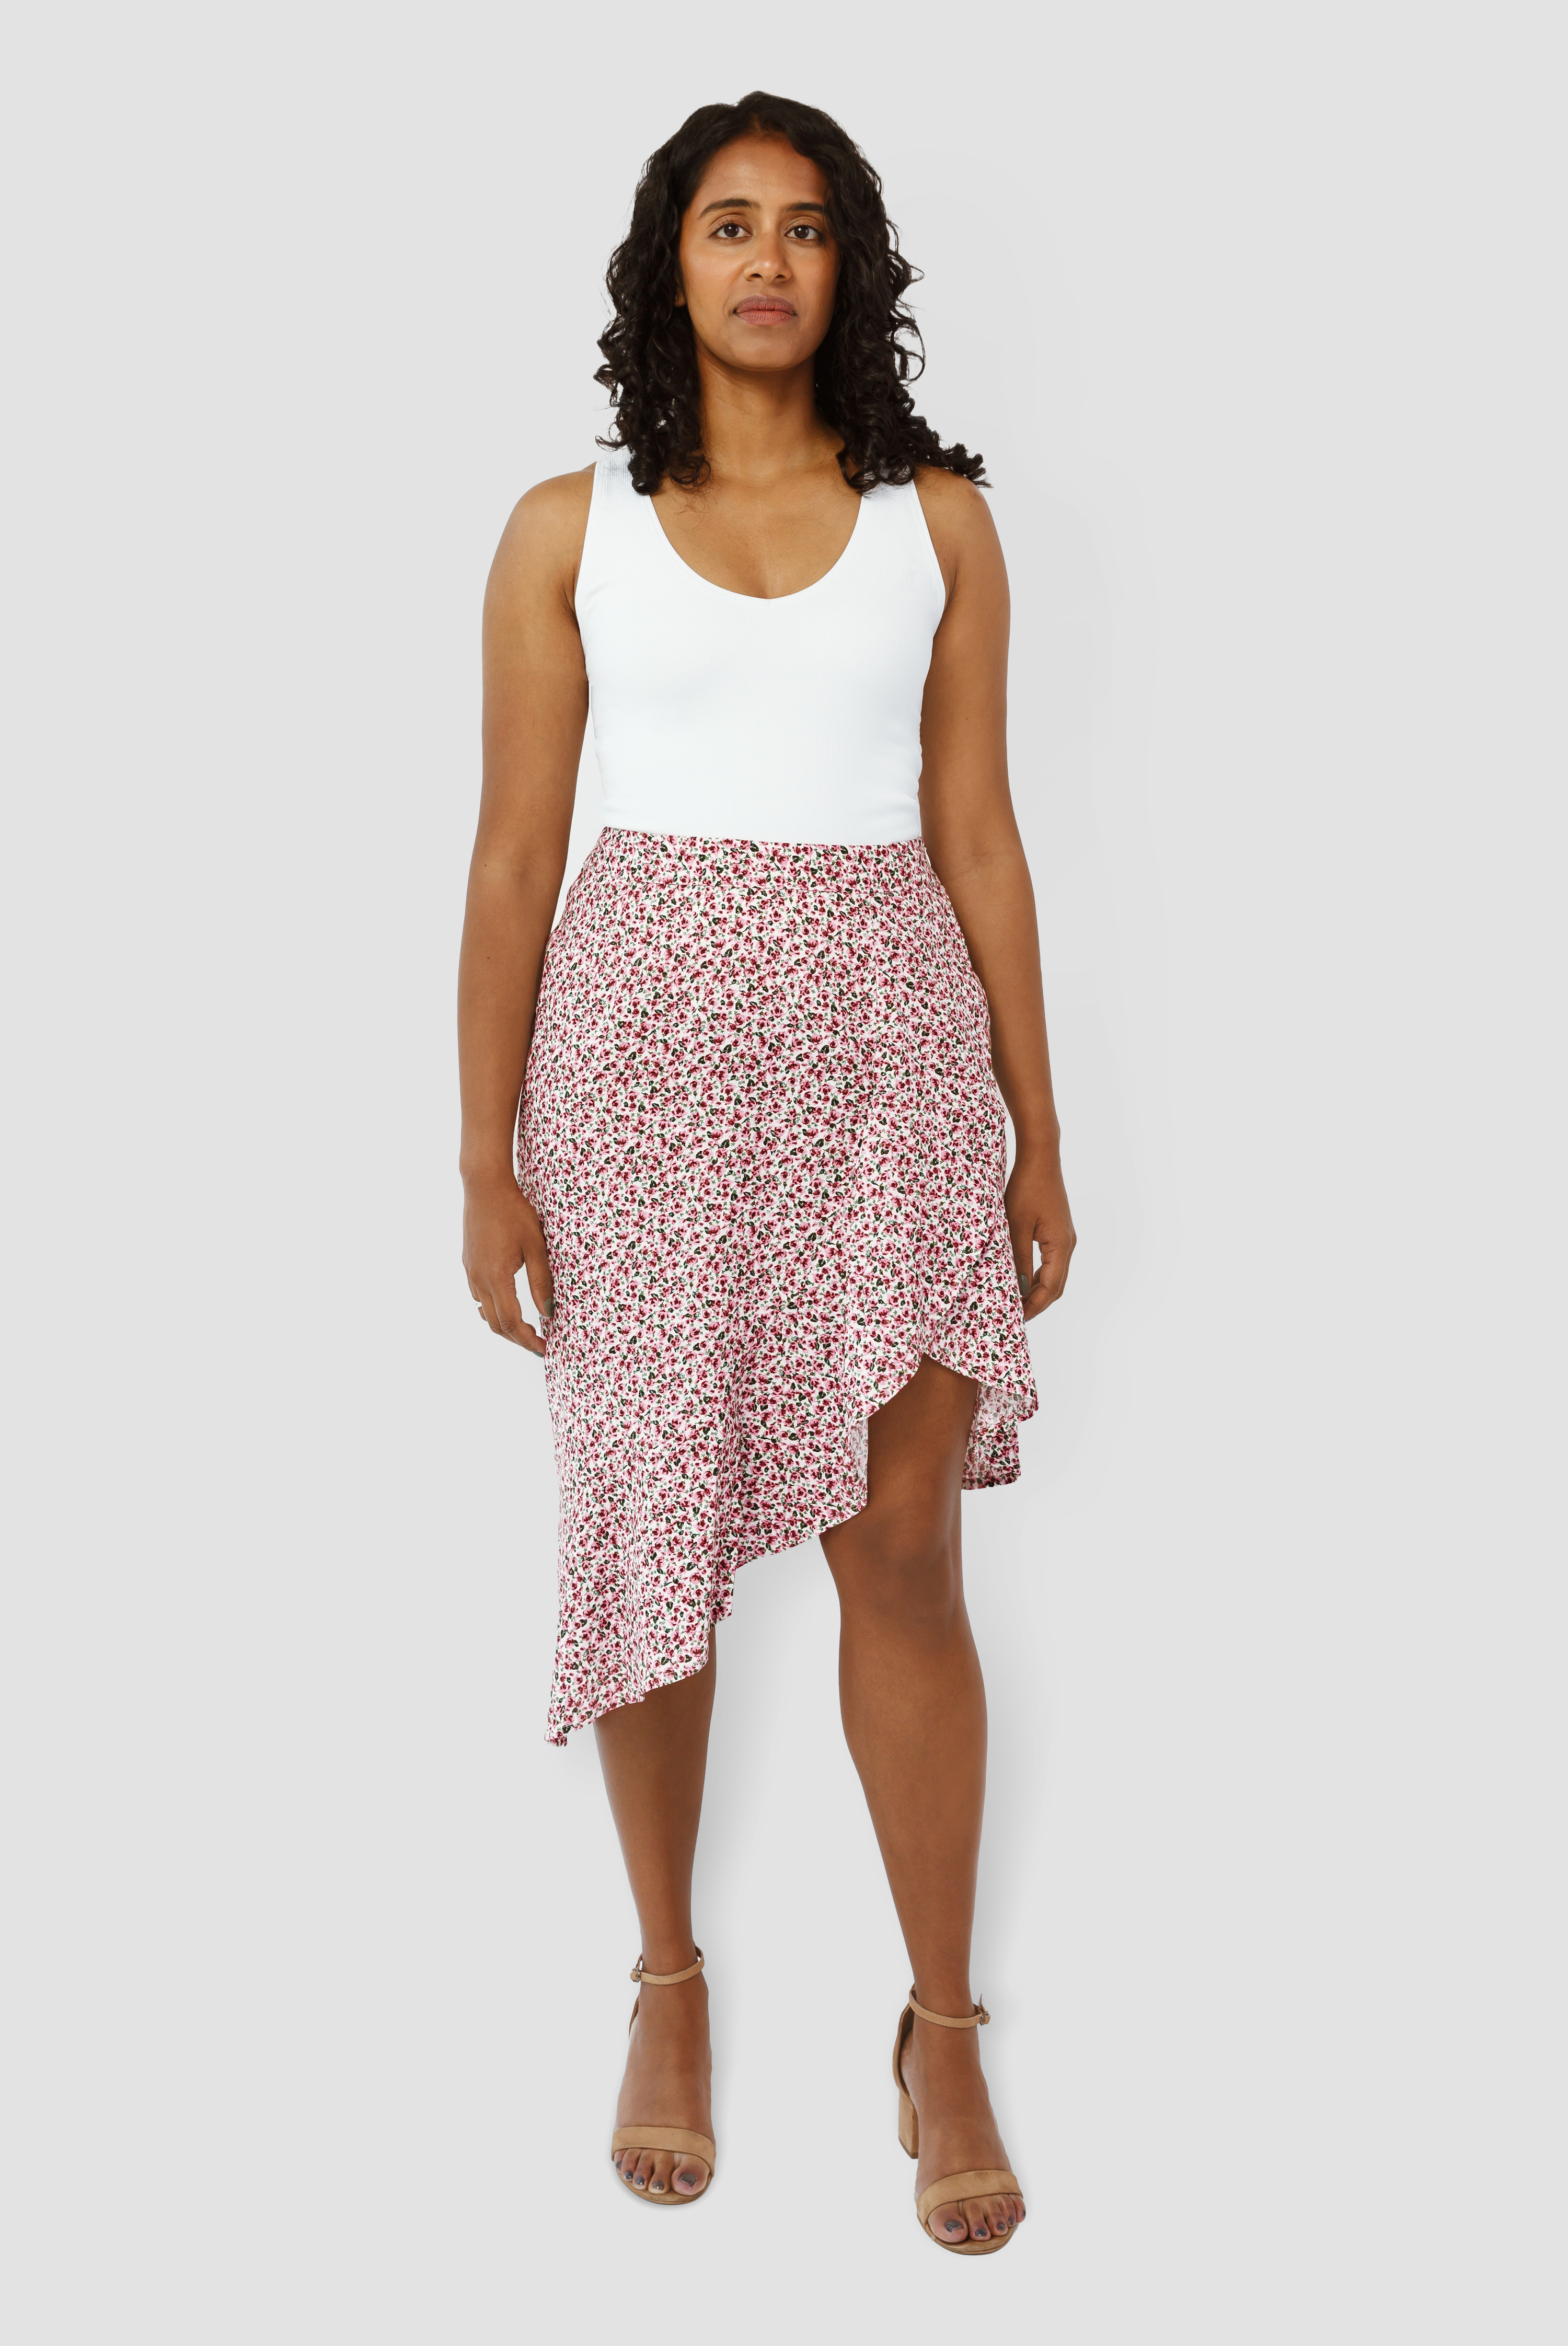 The Cascade Skirt by Aam is a universally flattering midi skirt. It sits high at the waist with more room for full hips and thighs. Shown here is the front view on a model who is 5'7